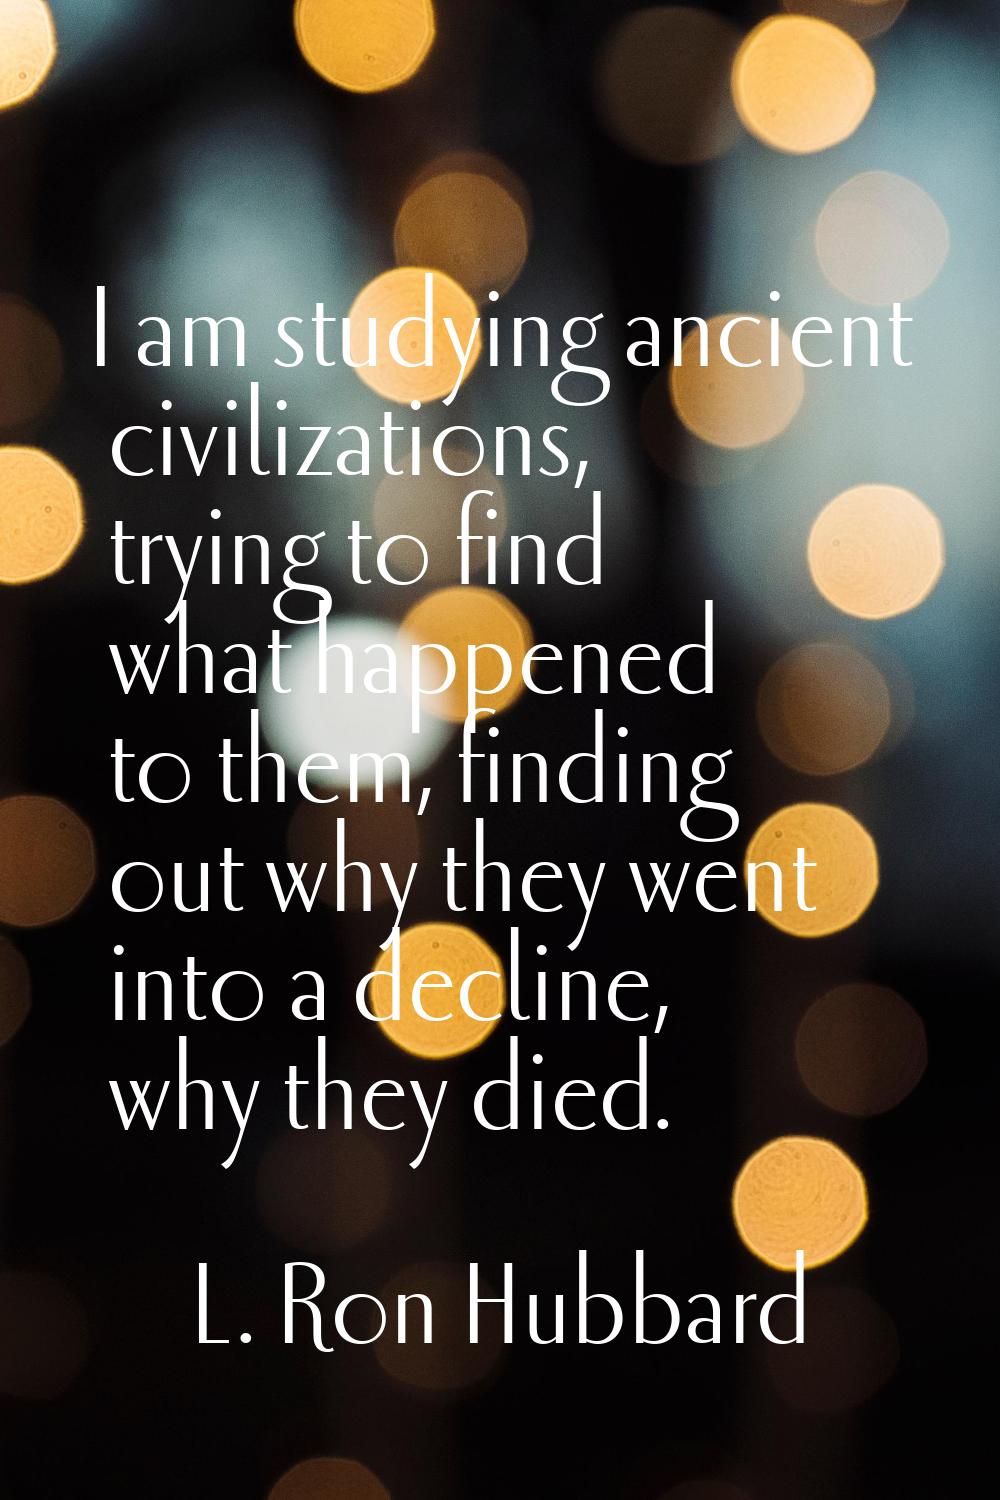 I am studying ancient civilizations, trying to find what happened to them, finding out why they wen